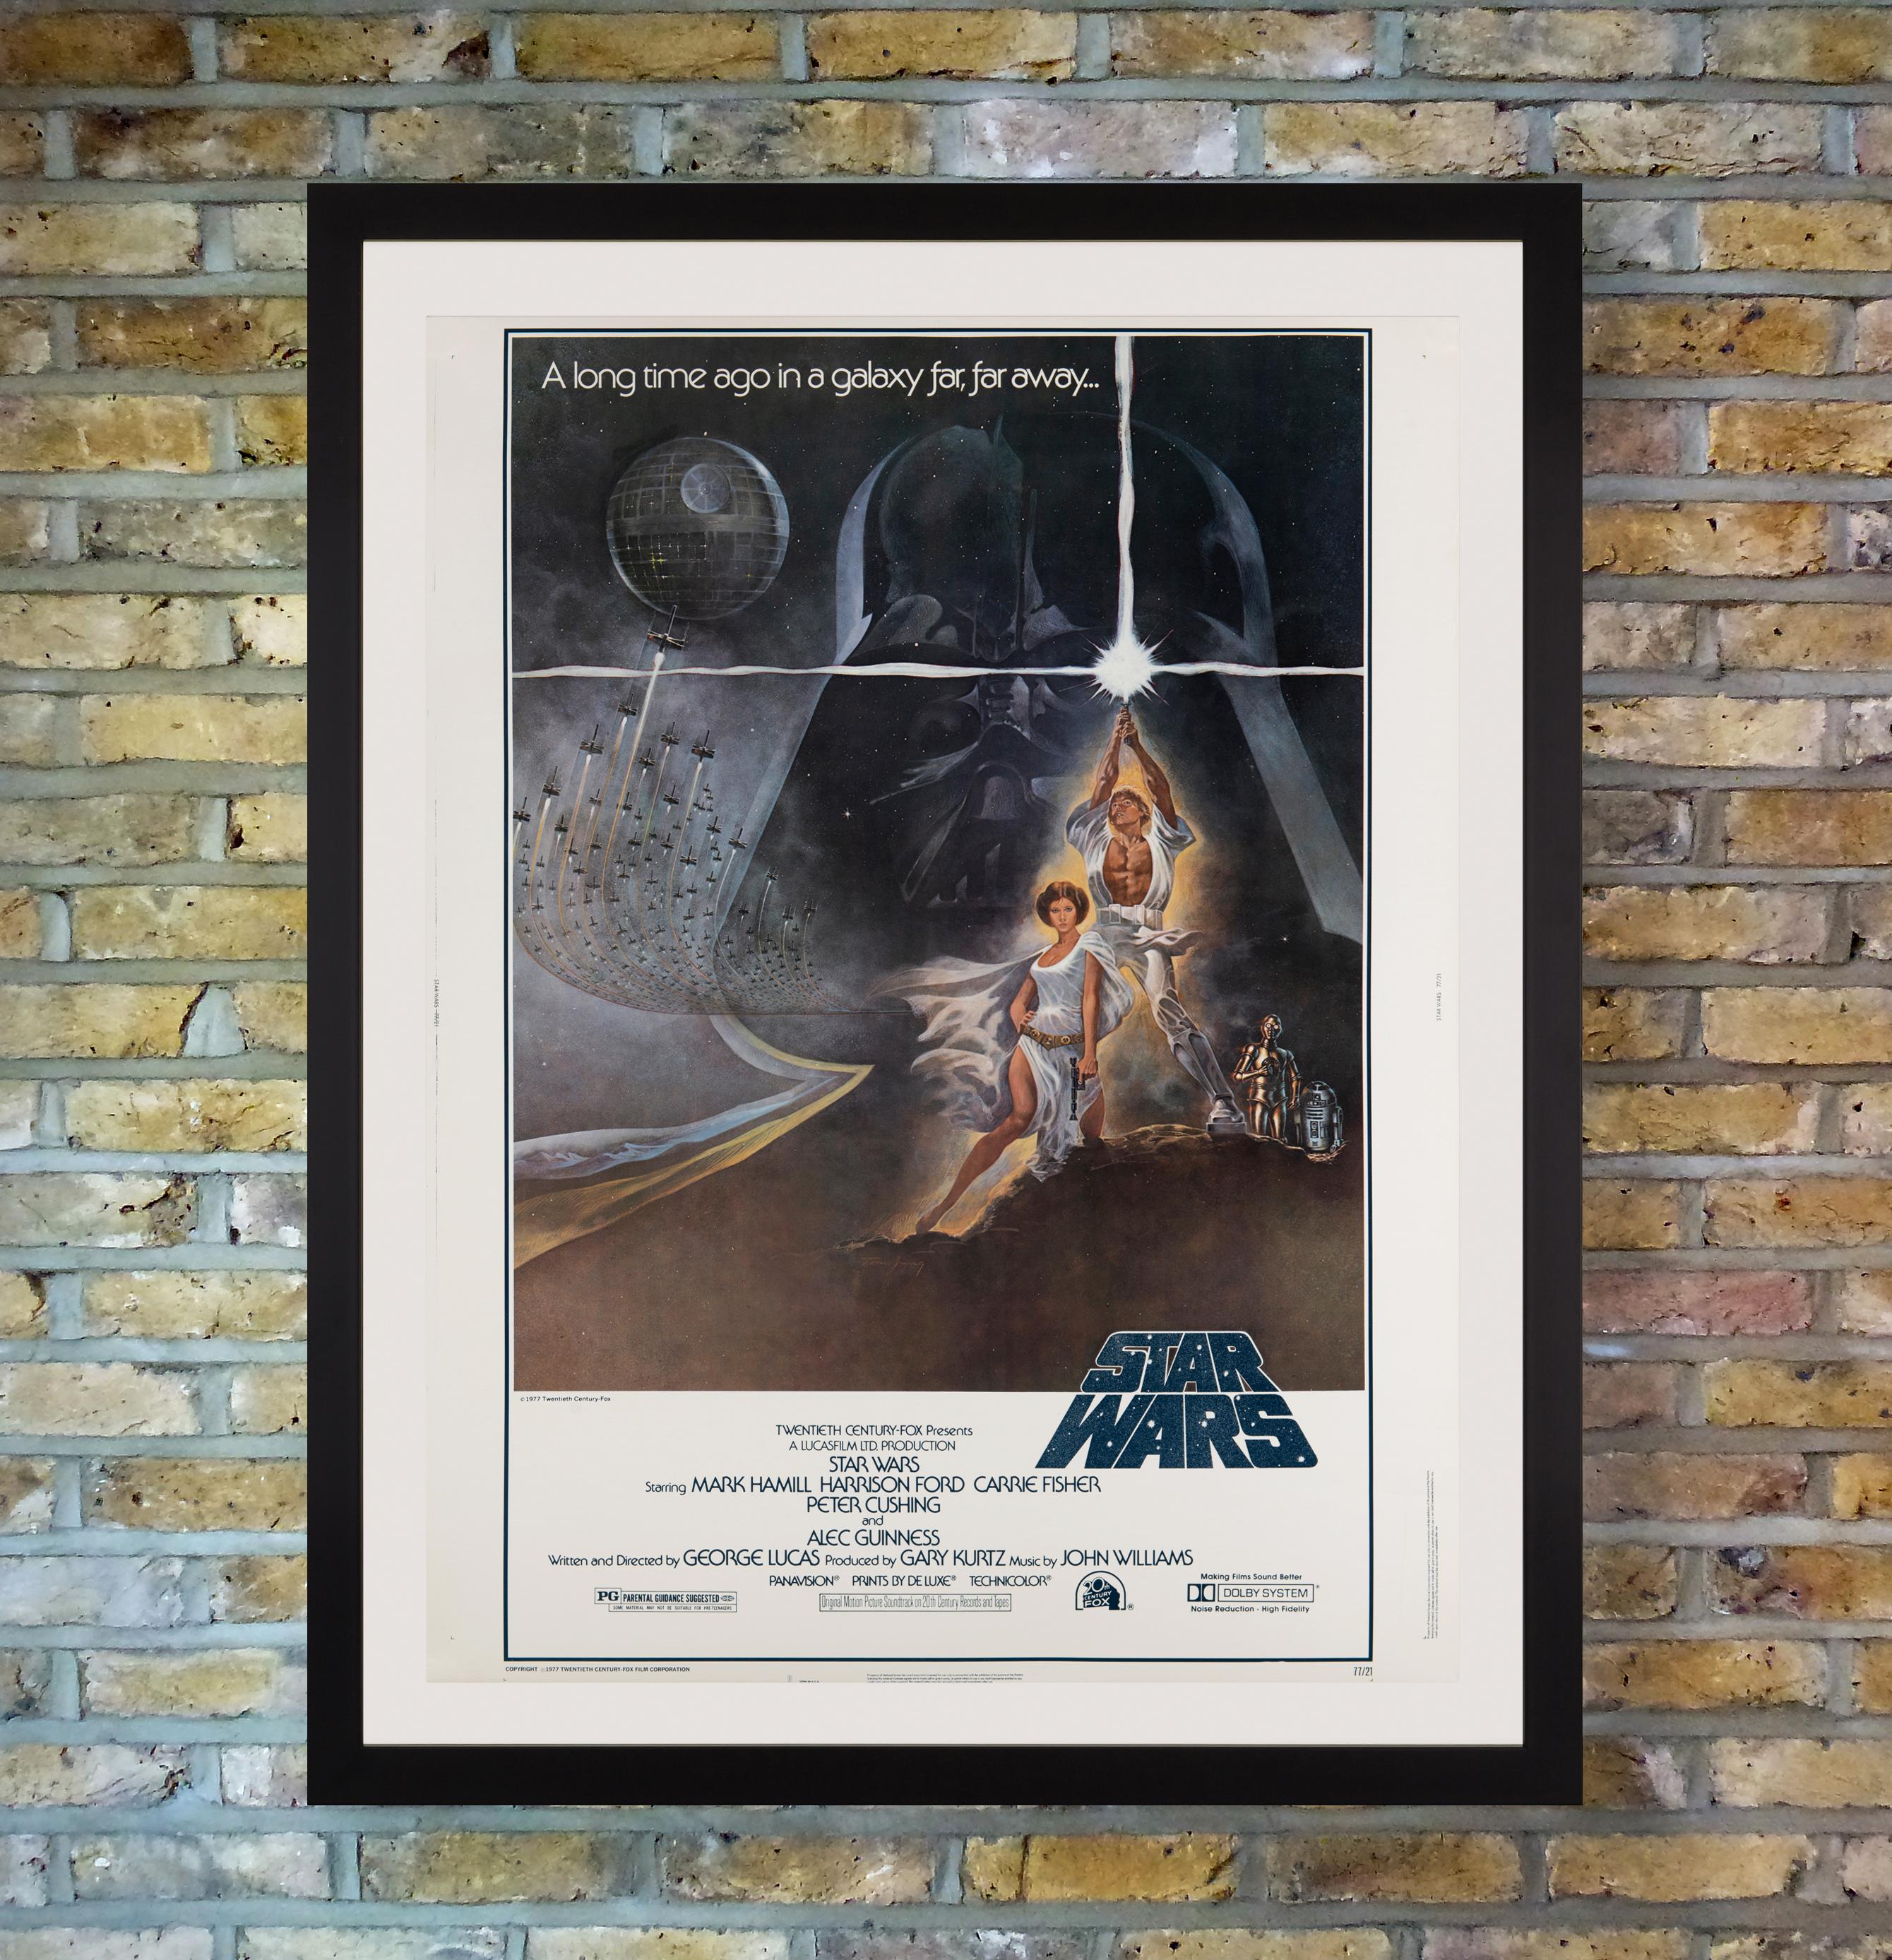 A rare US 30x40 cardstock poster for the first instalment of George Lucas' original, genre-defining, sci-fi trilogy 'Star Wars,' featuring Tom Jung's famous 'Style A' artwork designed for the more commonly seen US 'Style A' One Sheet posters, which